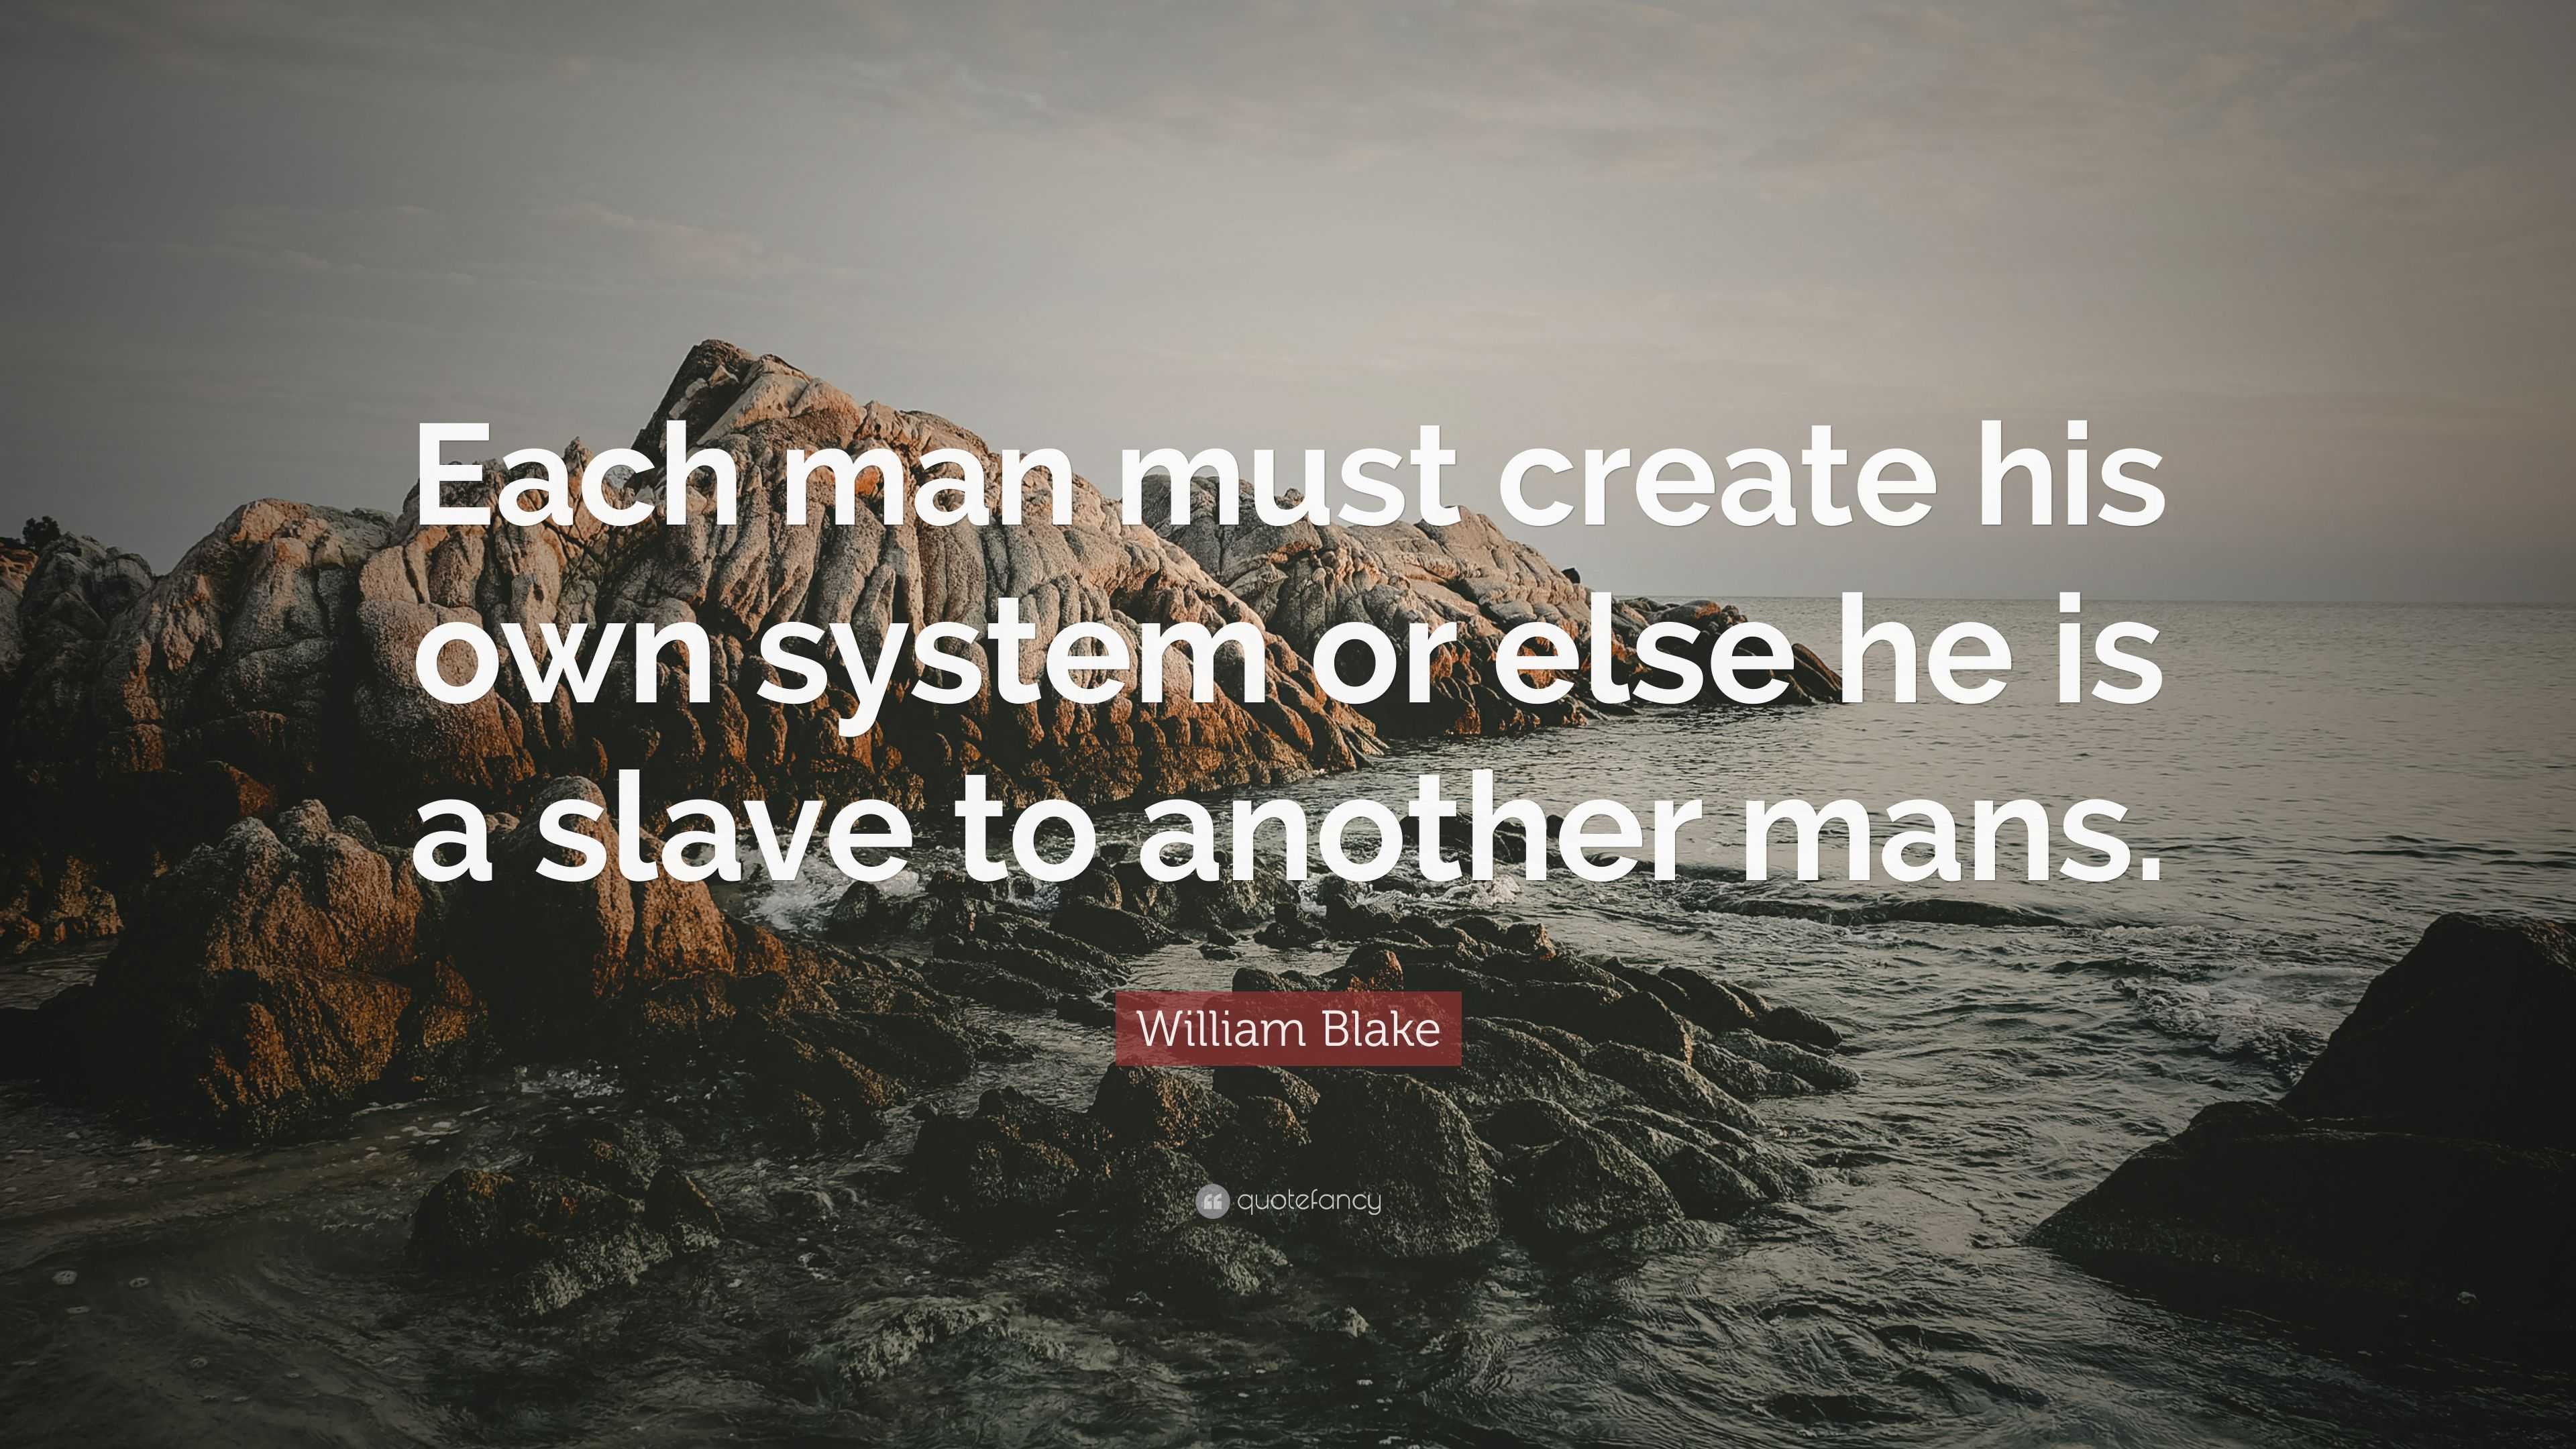 William Blake Quote: “Each man must create his own system or else he is ...